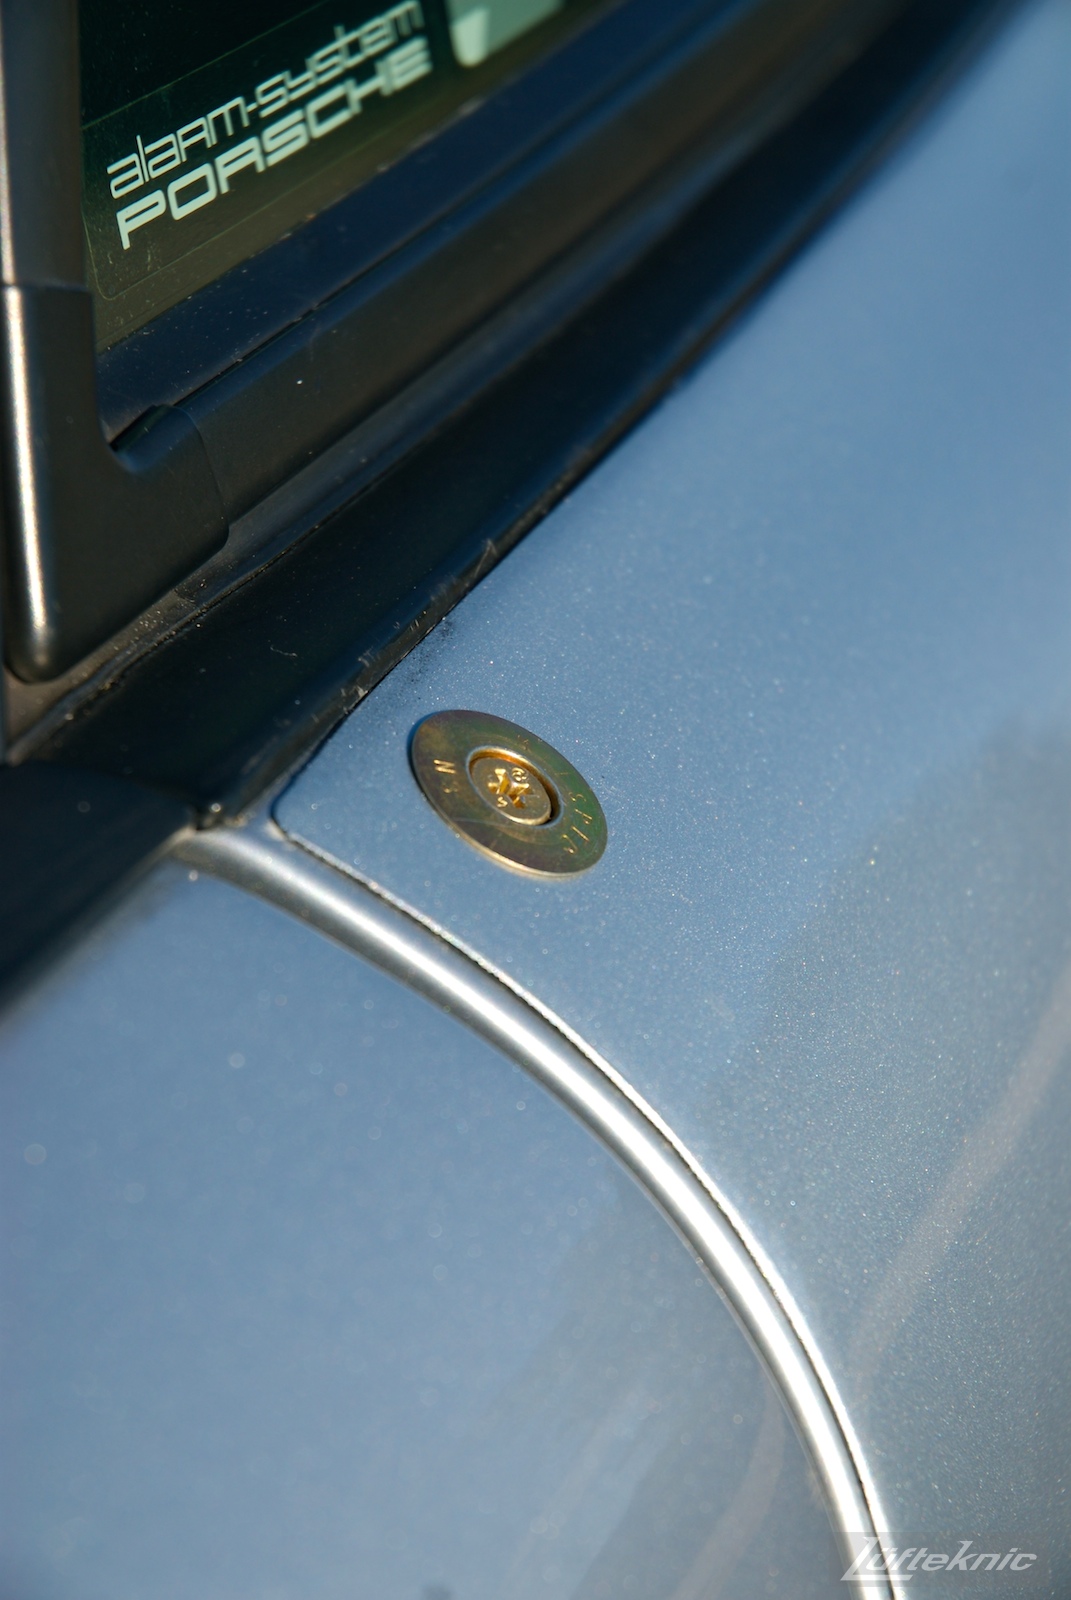 A detailed photo of a cam lock fastener on the side of the RS America.